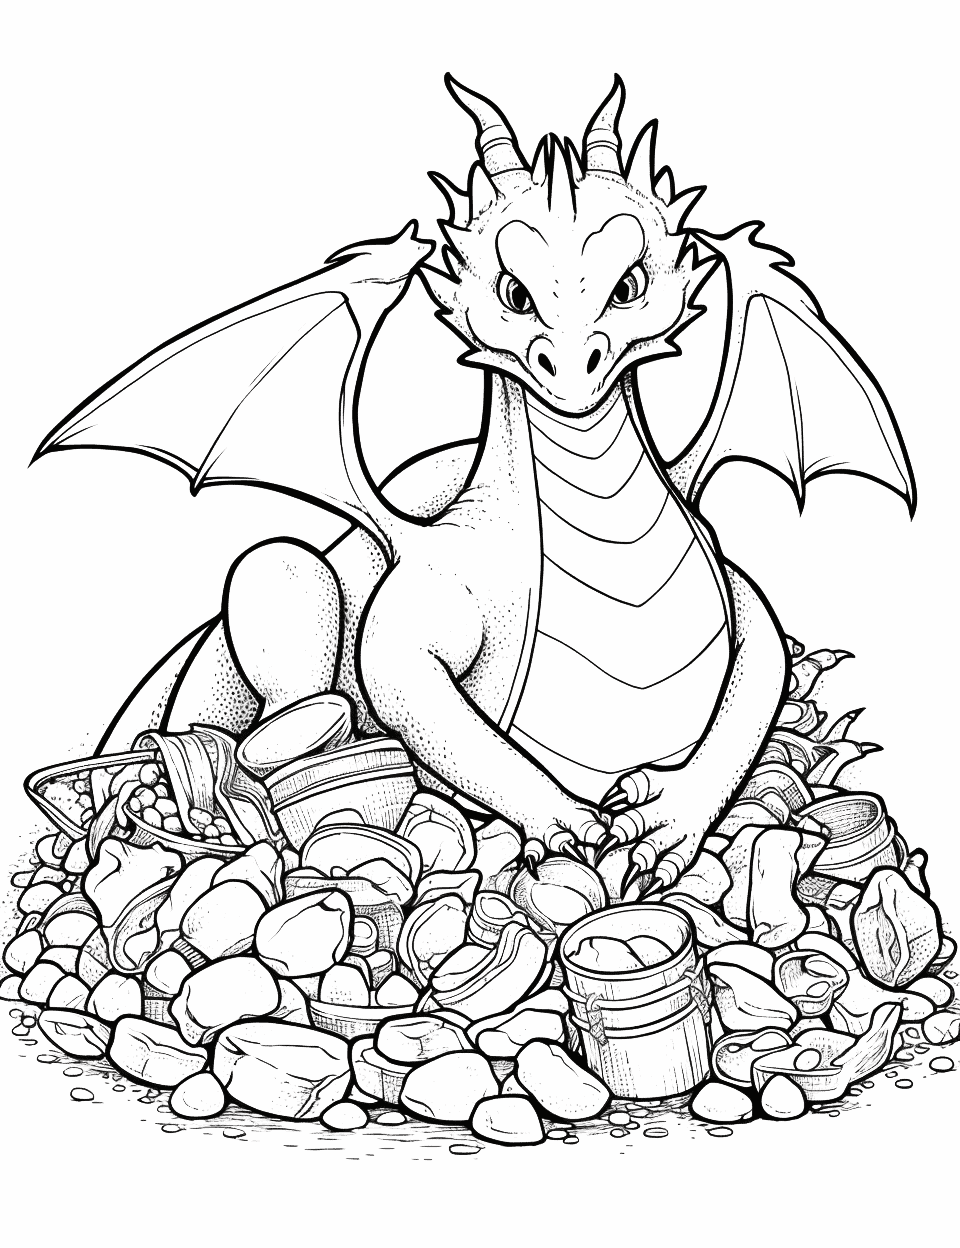 Dragon's Treasure Dragon Coloring Page - A dragon protectively huddled over its hoard of treasure.